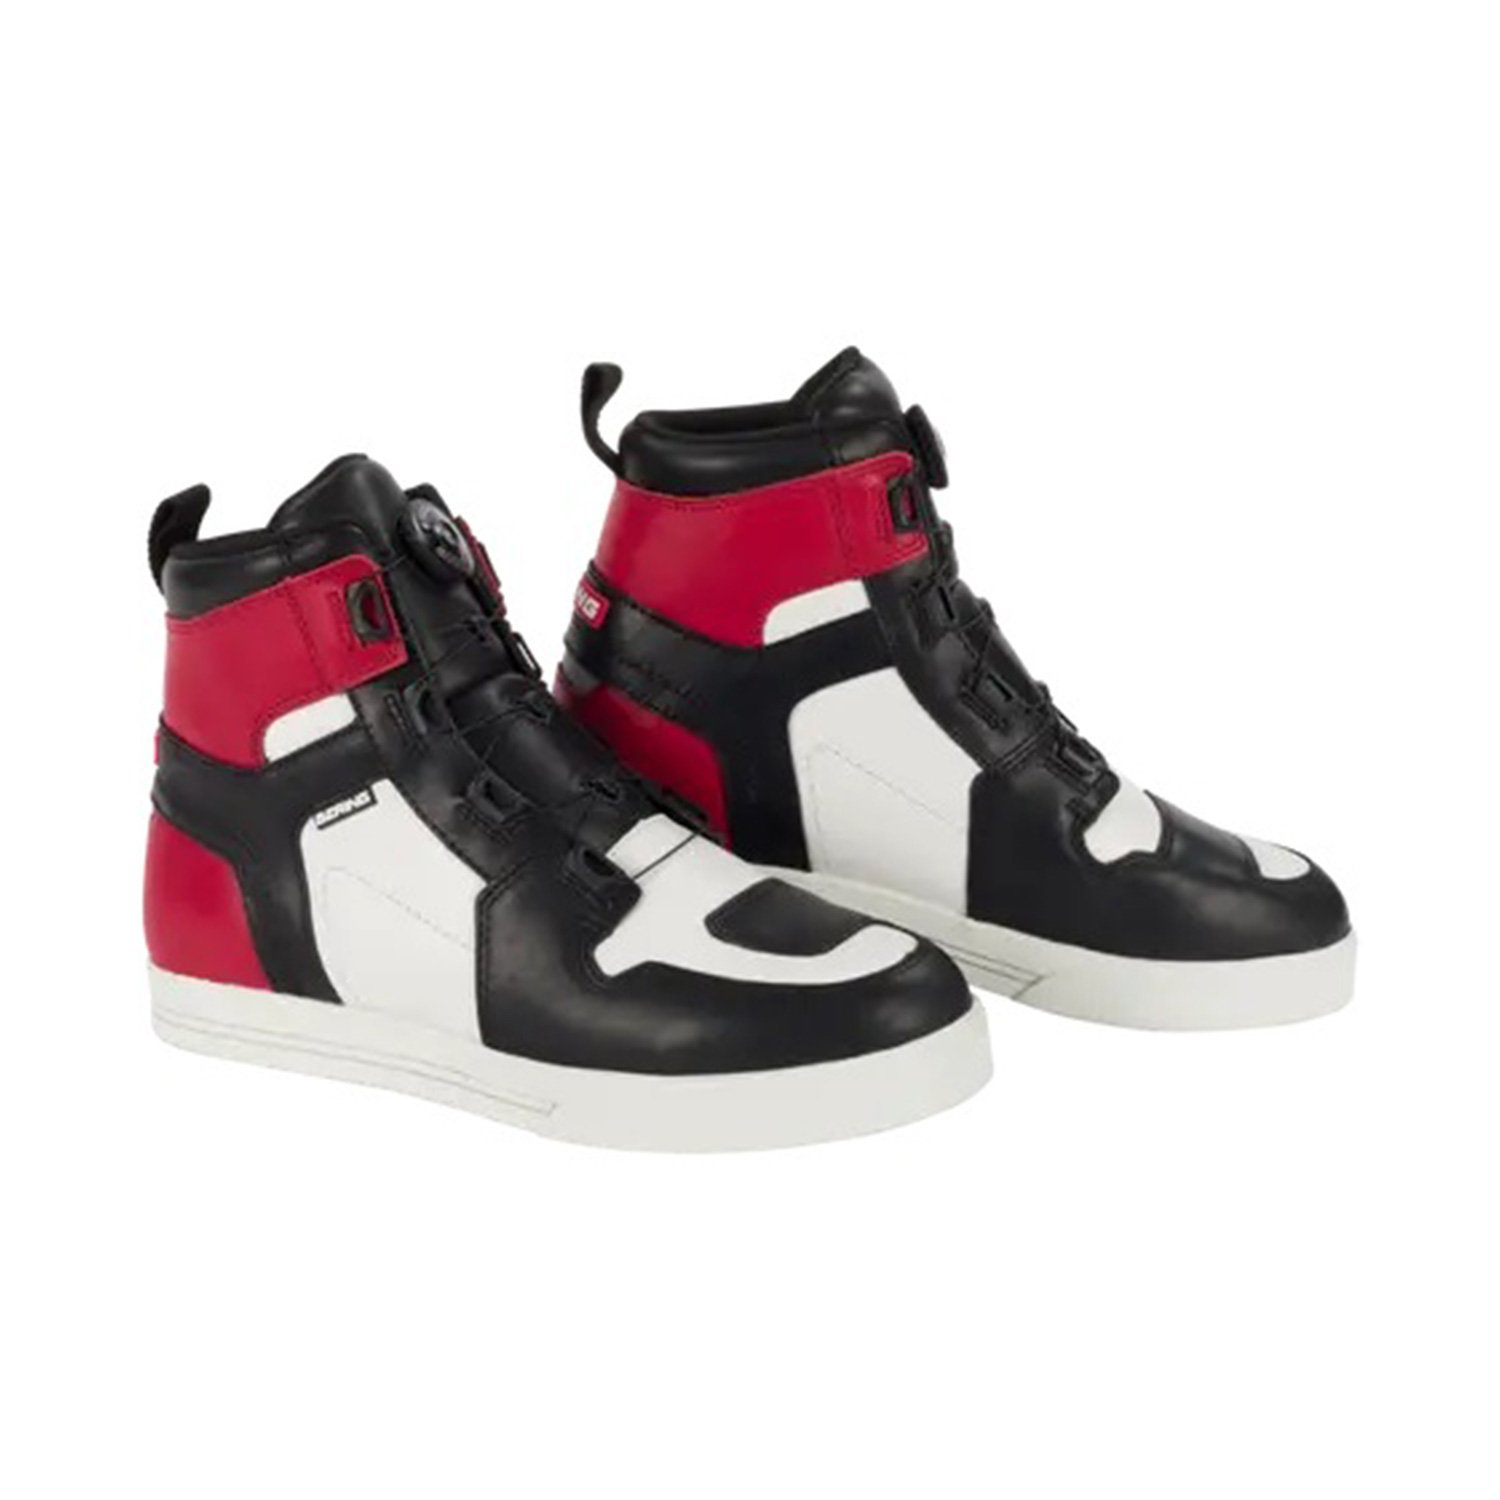 Image of Bering Sneakers Reflex A-Top Black White Red Talla 43